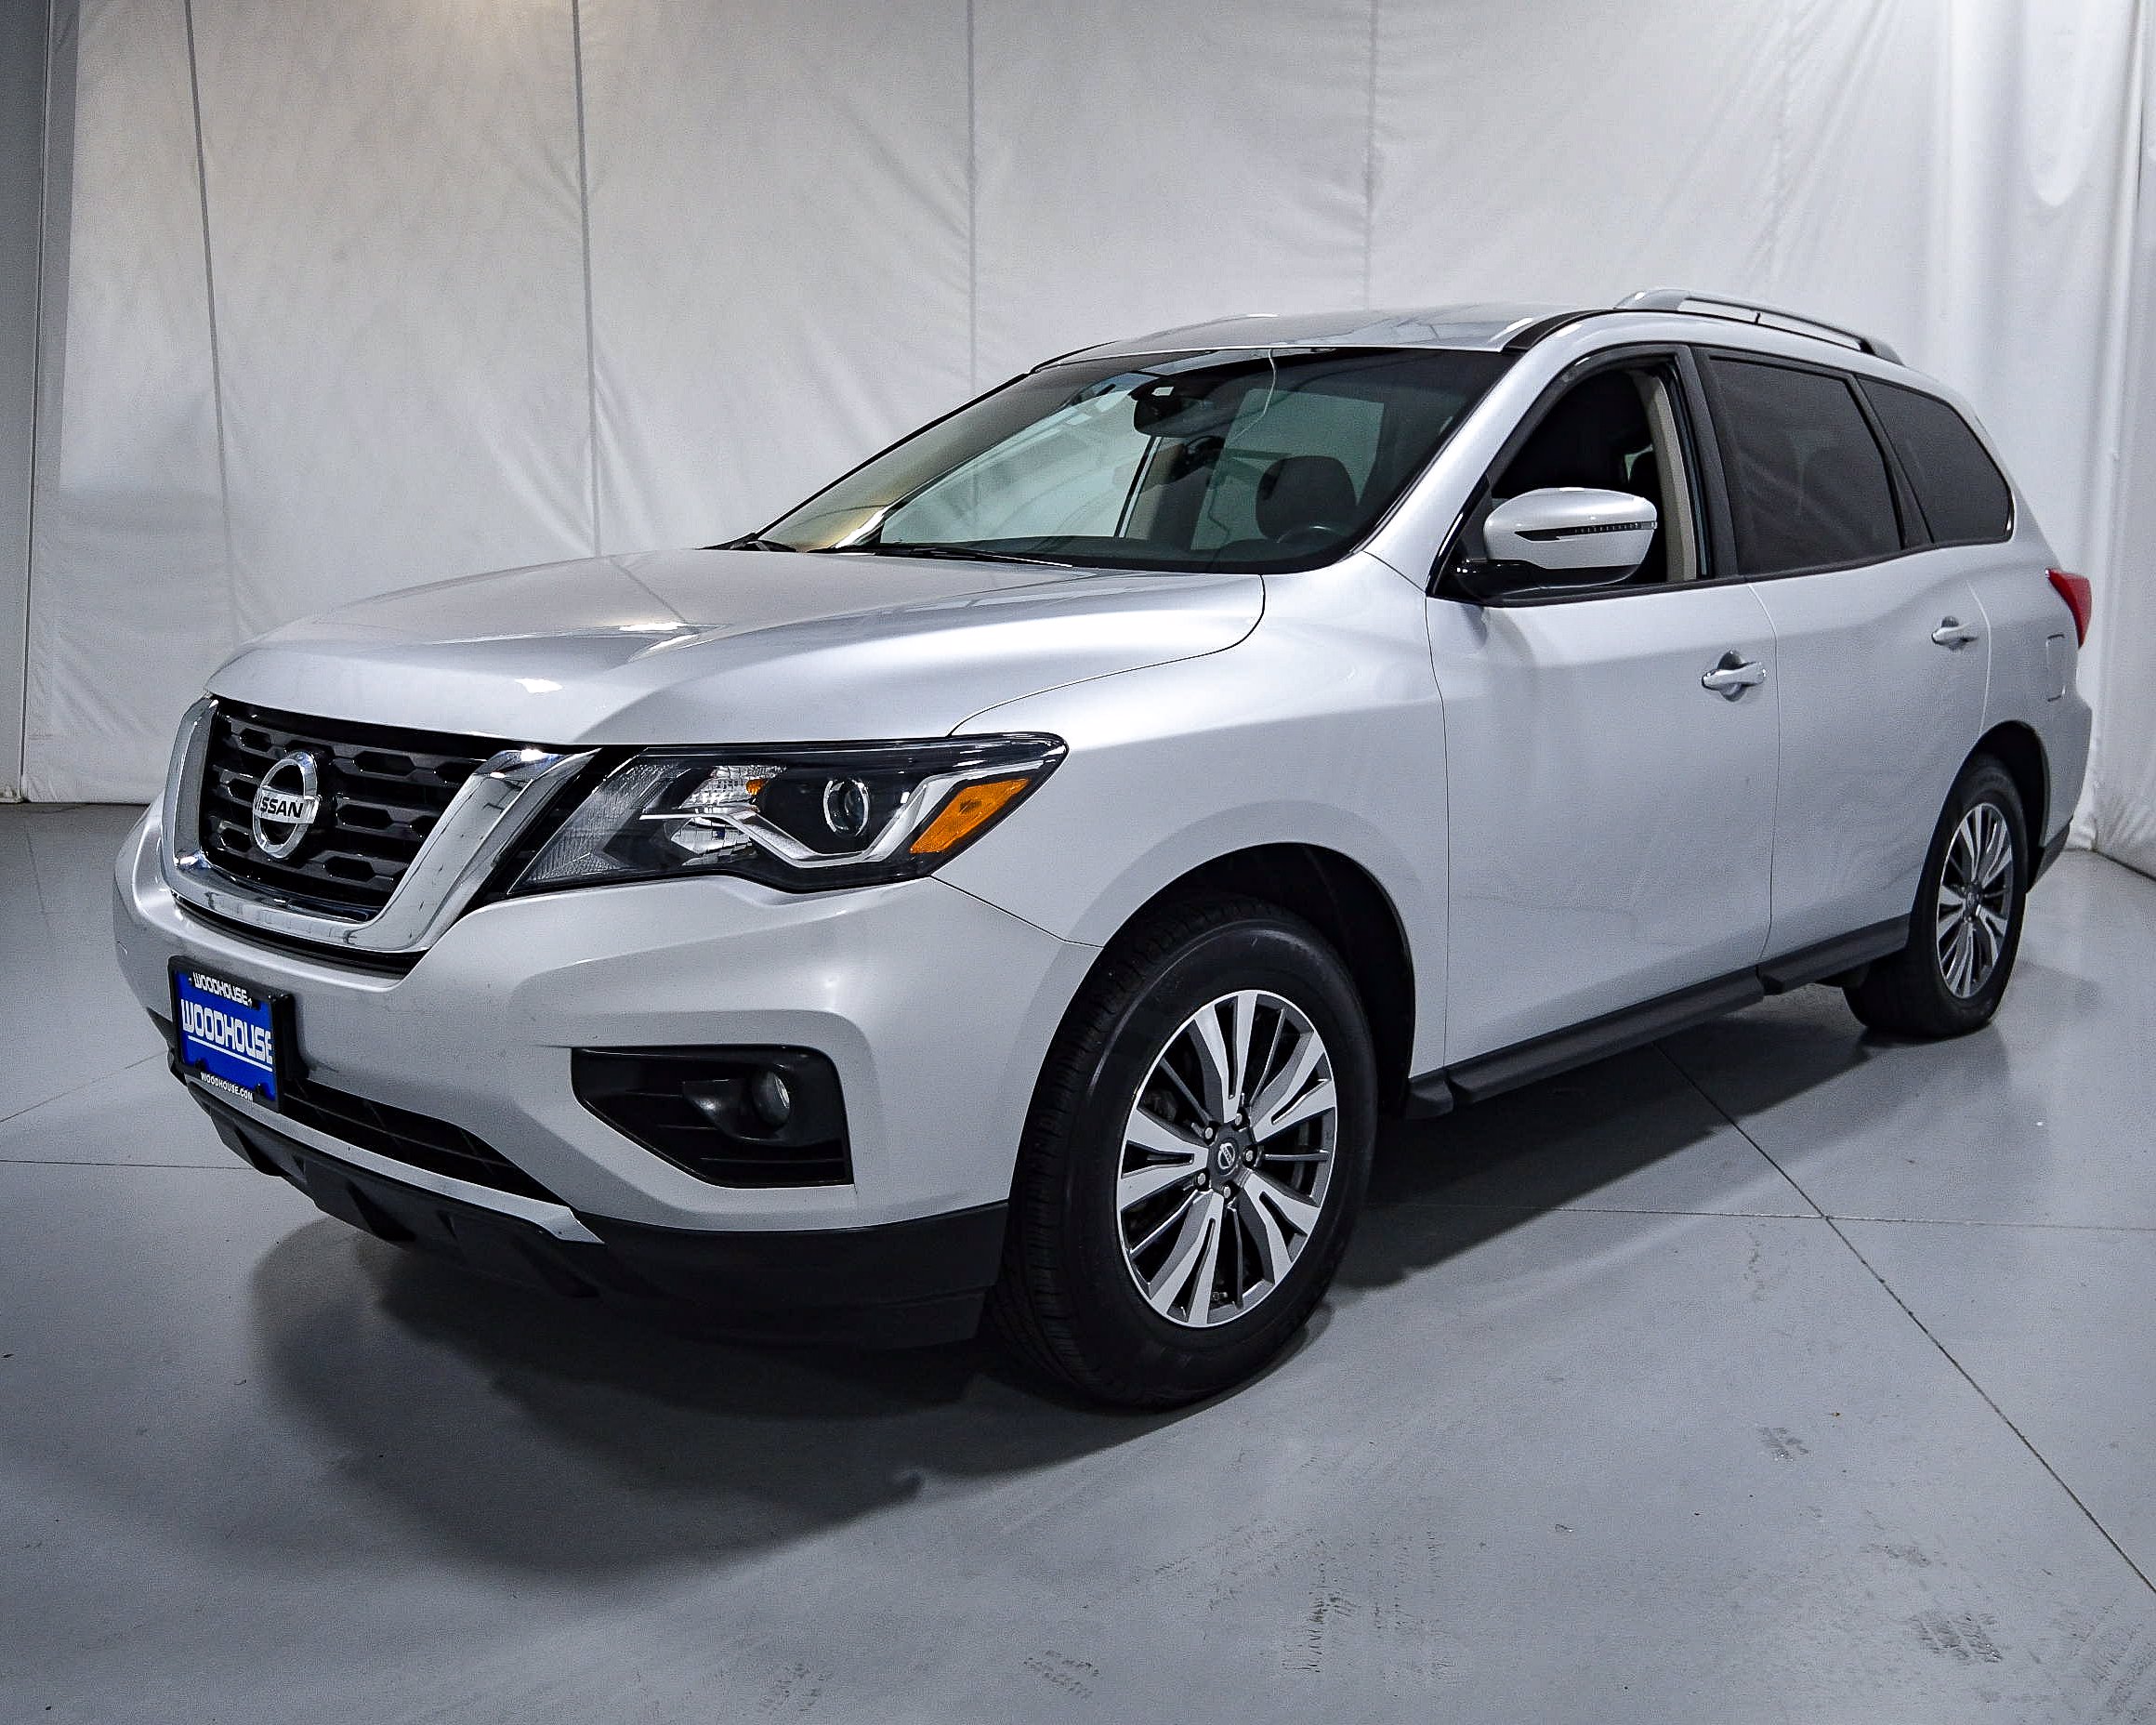 PreOwned 2018 Nissan Pathfinder SV 4WD Sport Utility